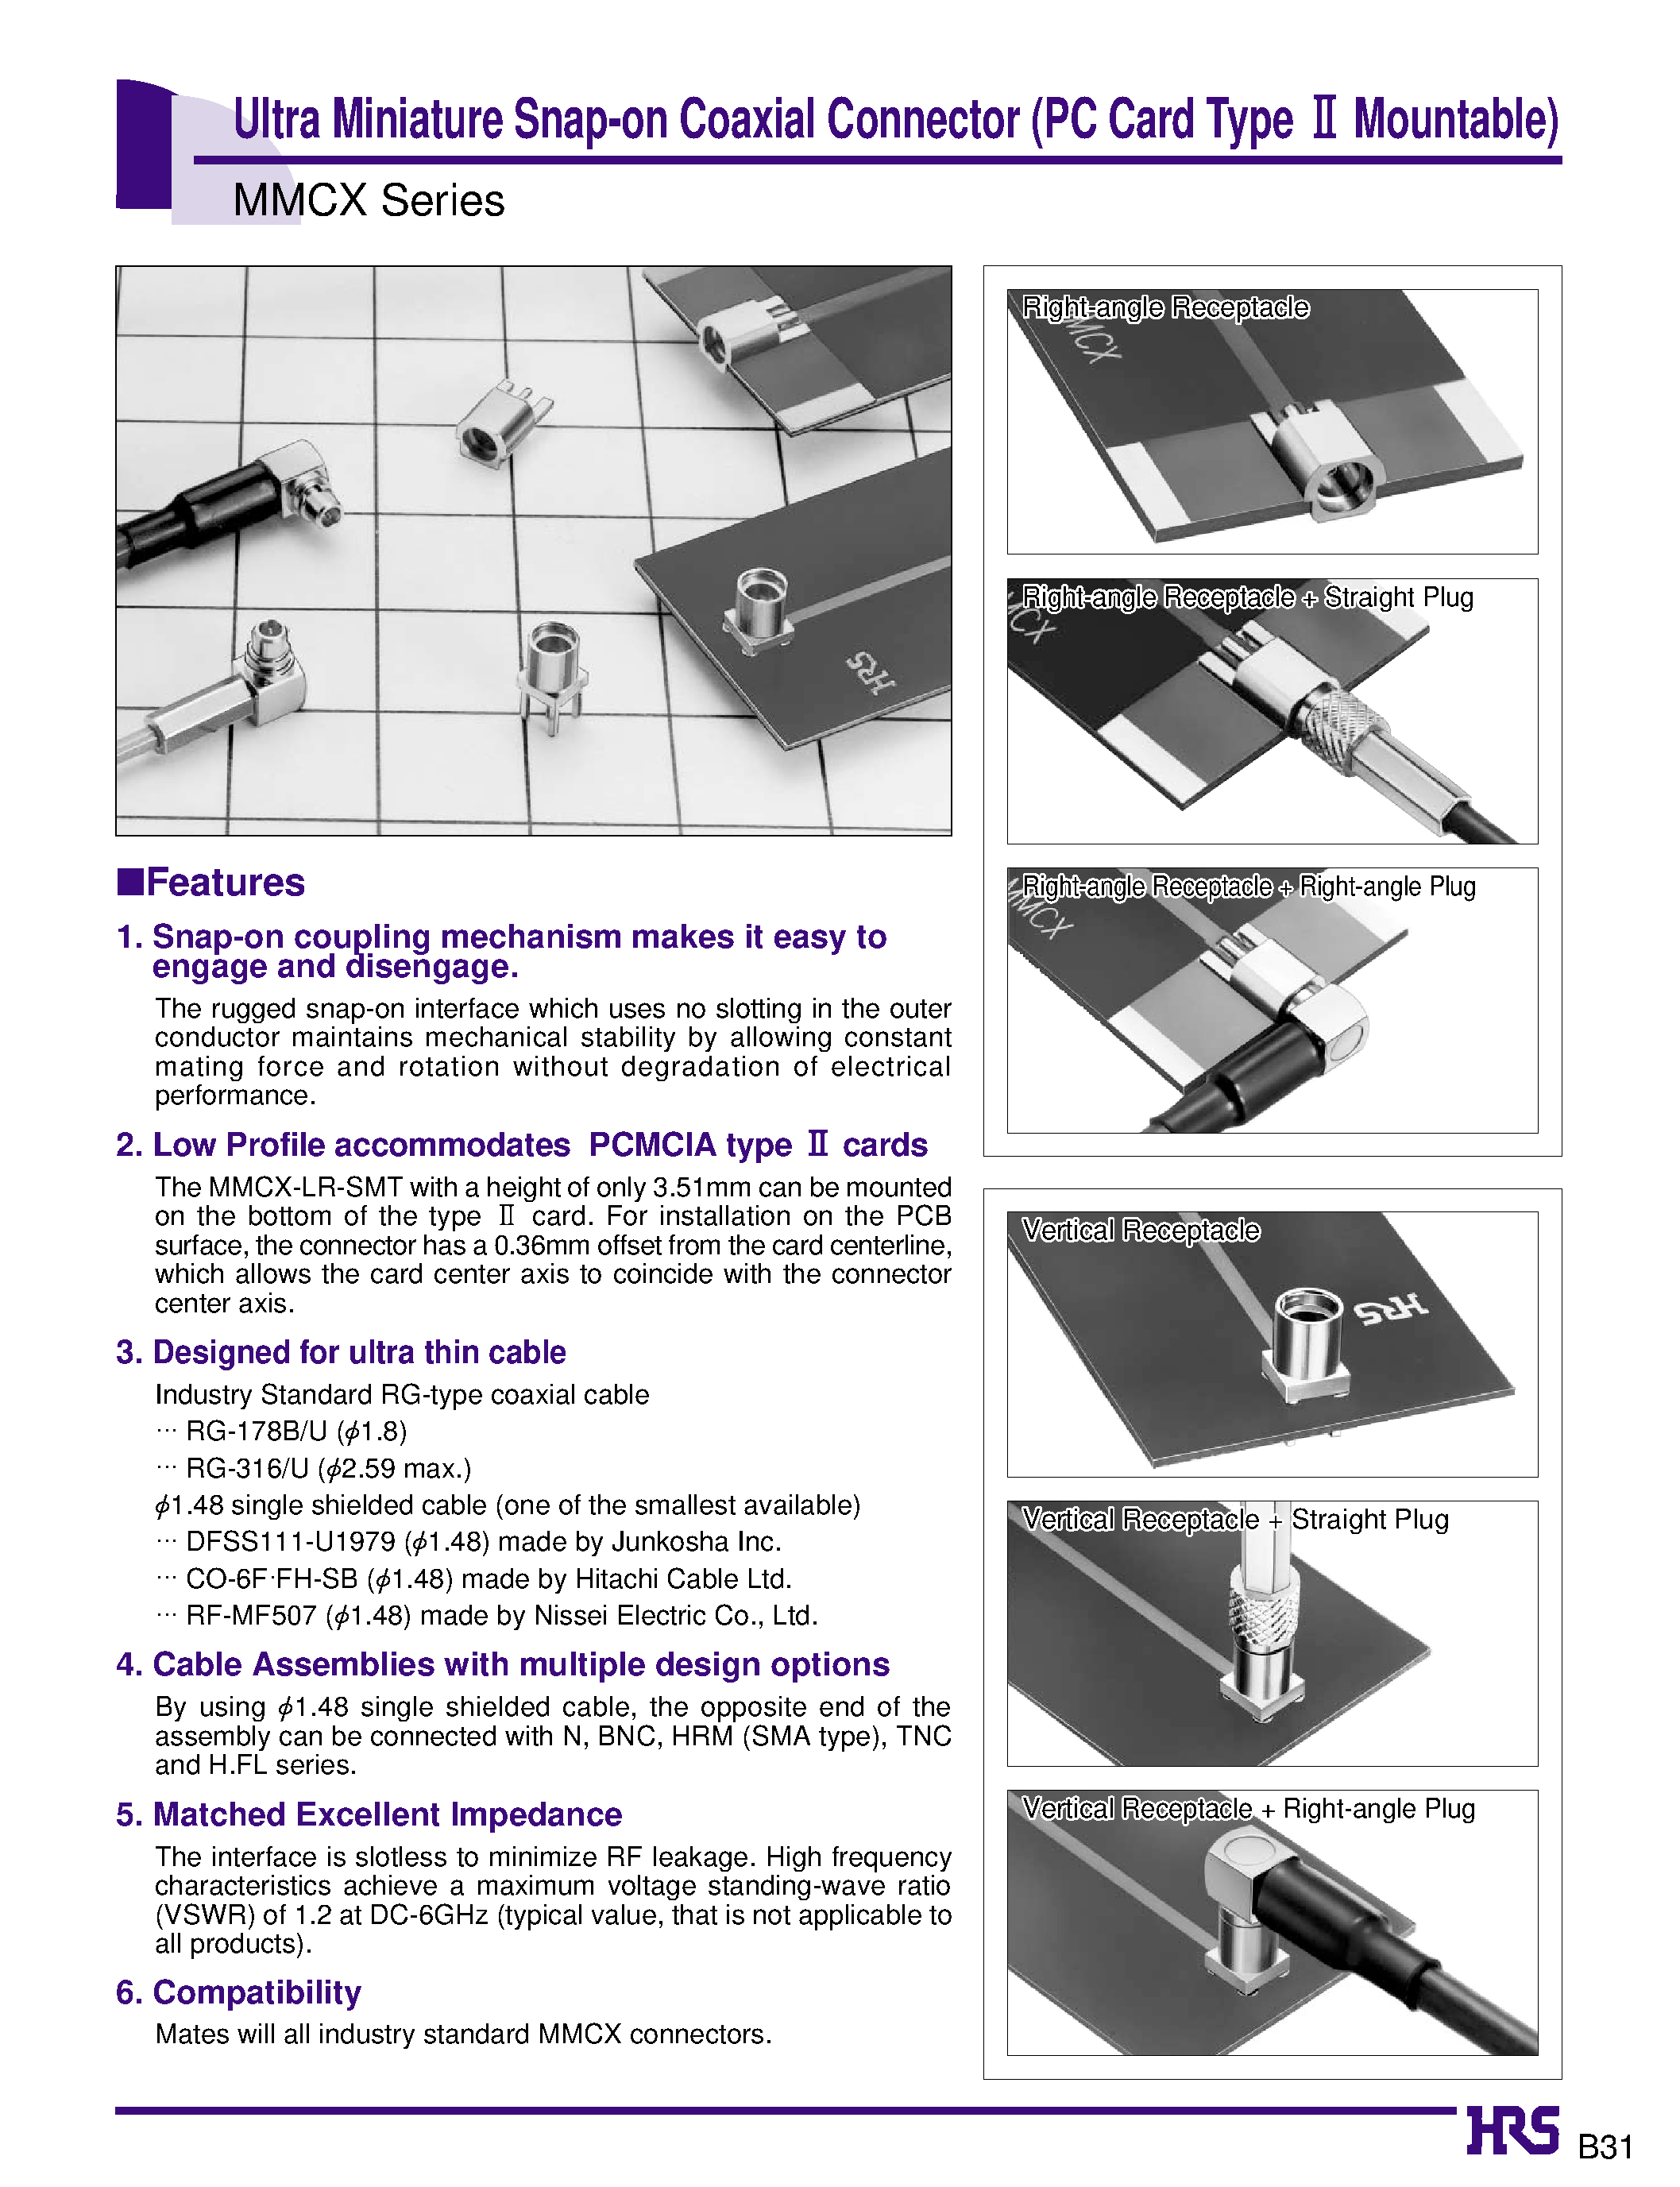 Datasheet MMCX-J-178B/U - Ultra Miniature Snap-on Coaxial Connector (PC Card Type 2 Mountable) page 1